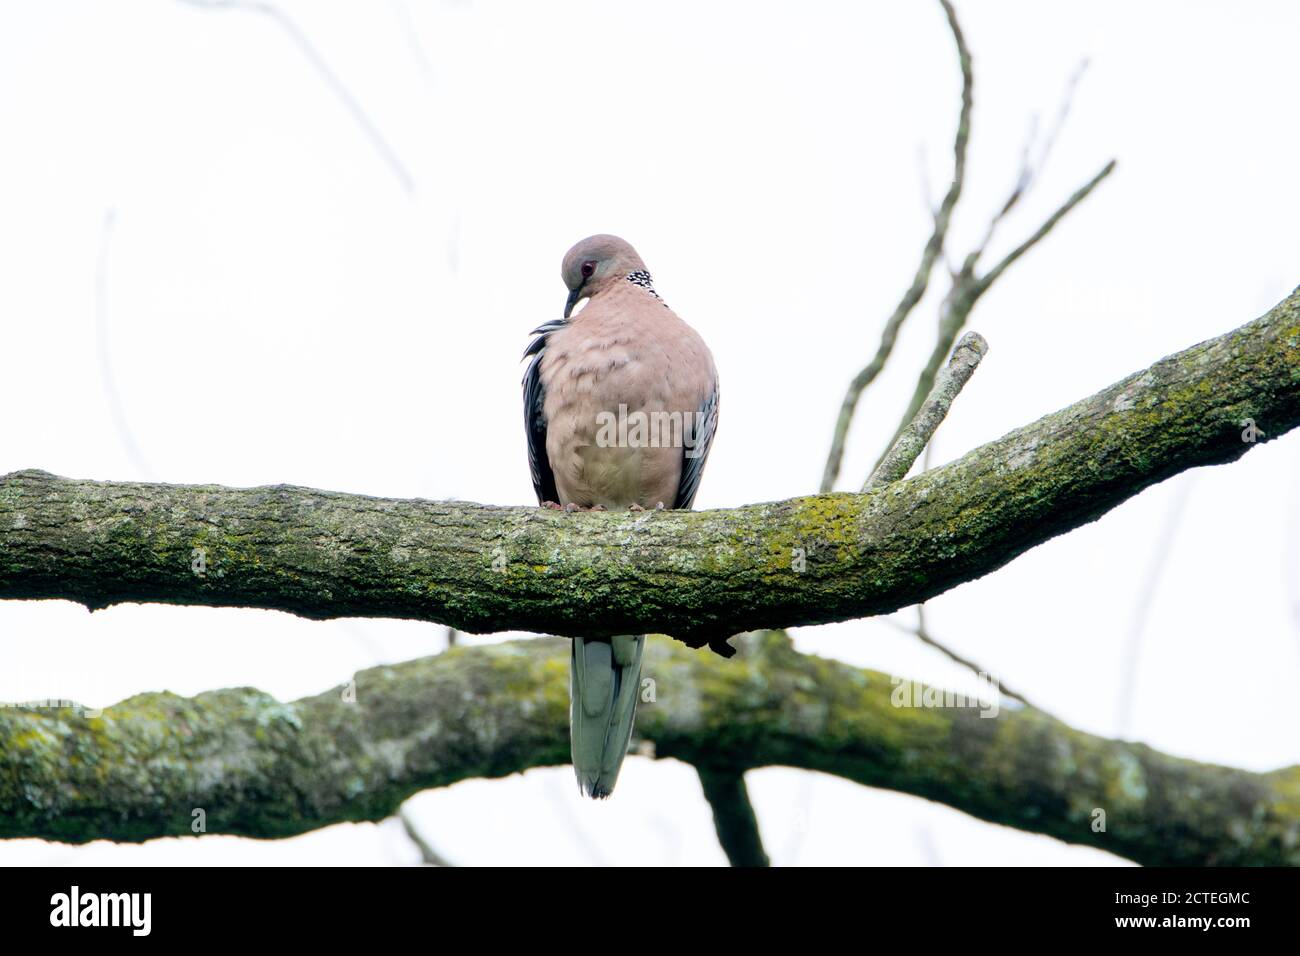 Spotted dove on tree branch Stock Photo